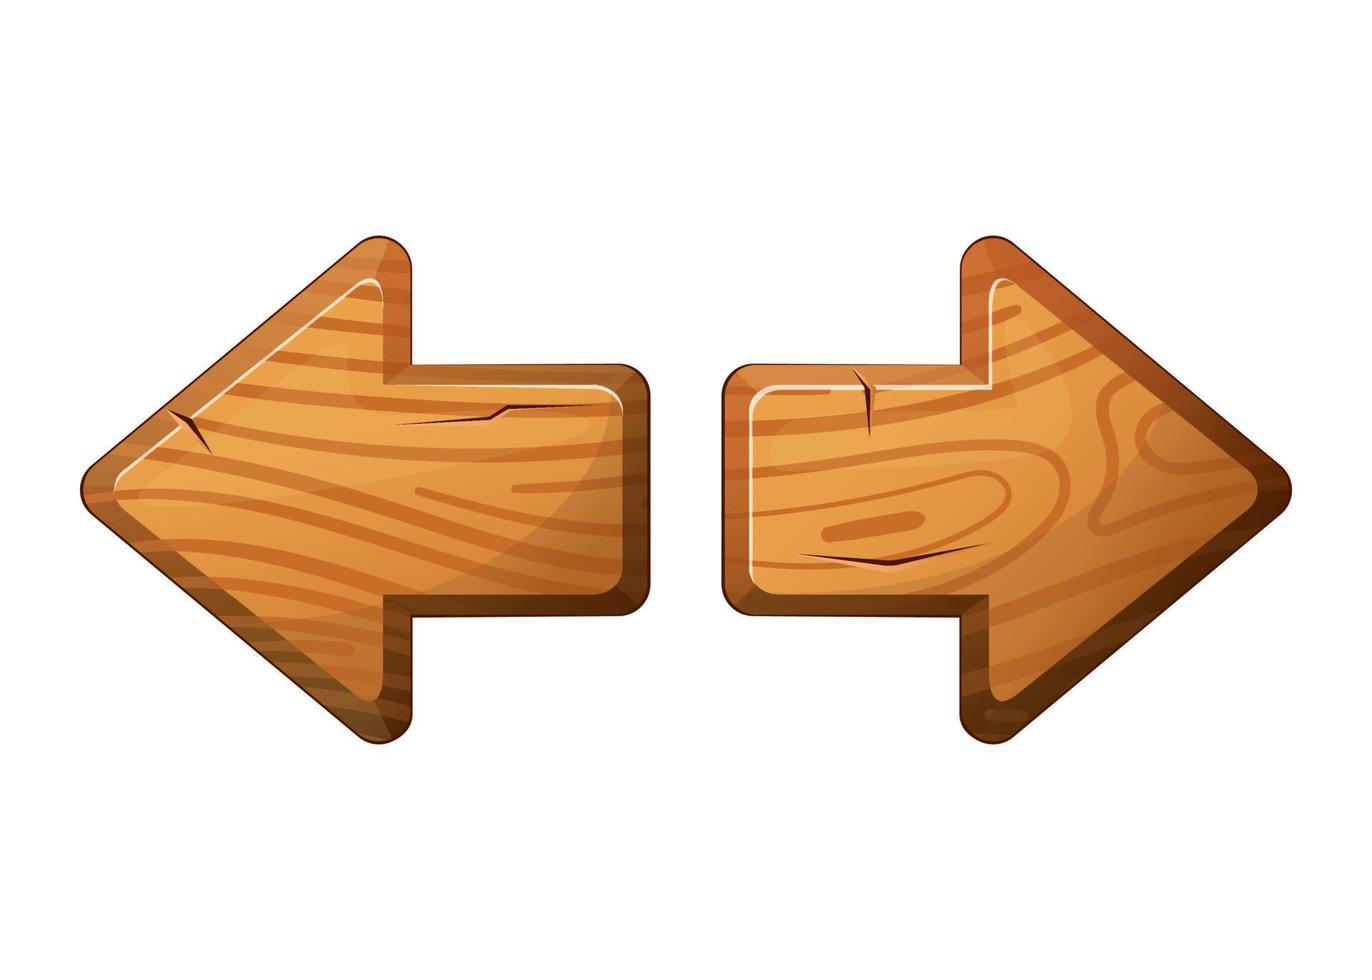 Wooden arrow buttons for user interface design in game, video player or website. Vector cartoon